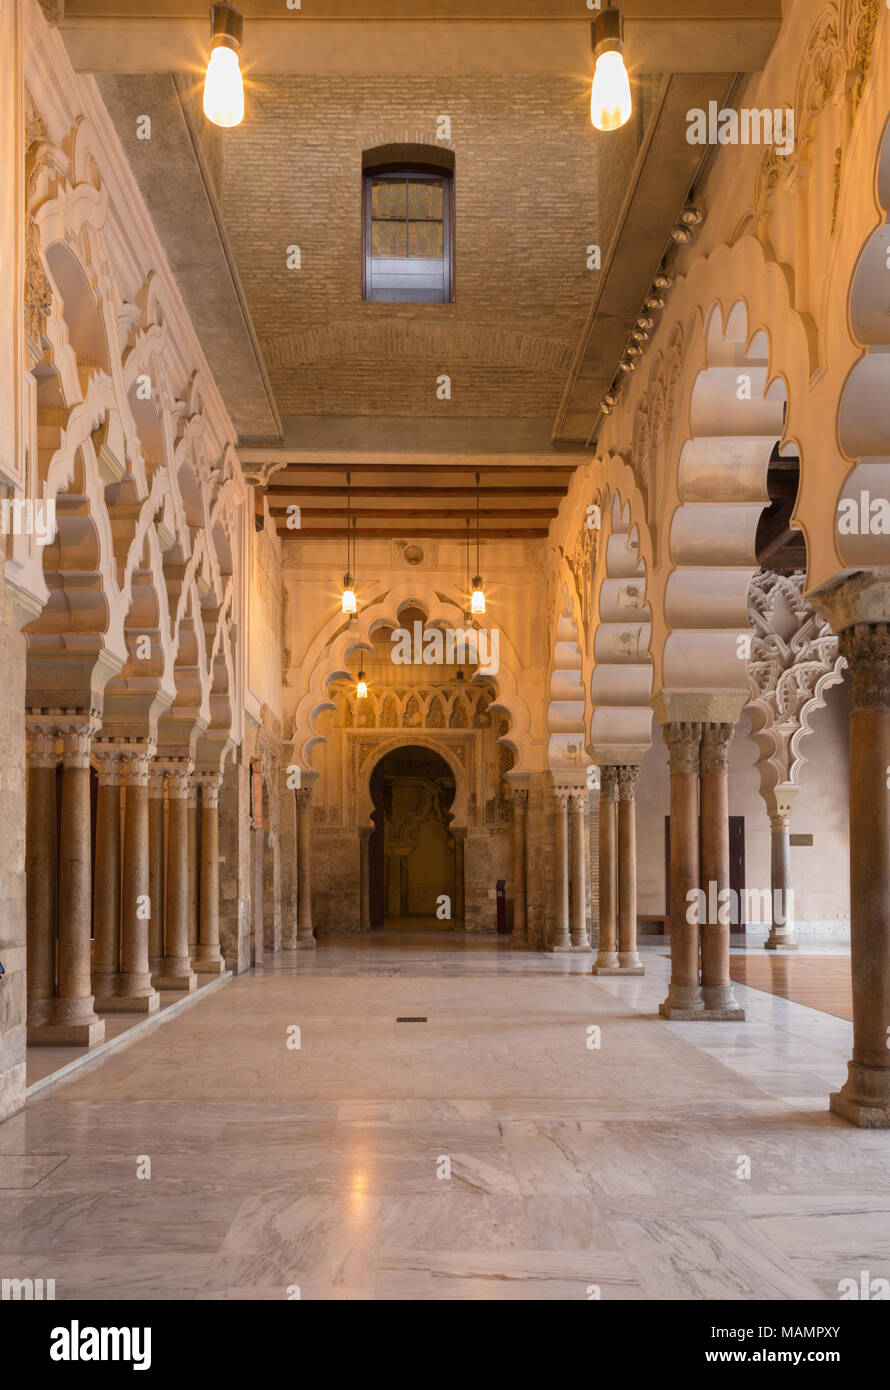 ZARAGOZA, SPAIN - MARCH 2, 2018: The hall of La Aljaferia palace - Stays of the North Tire, with triple access to the Golden Hall. Stock Photo